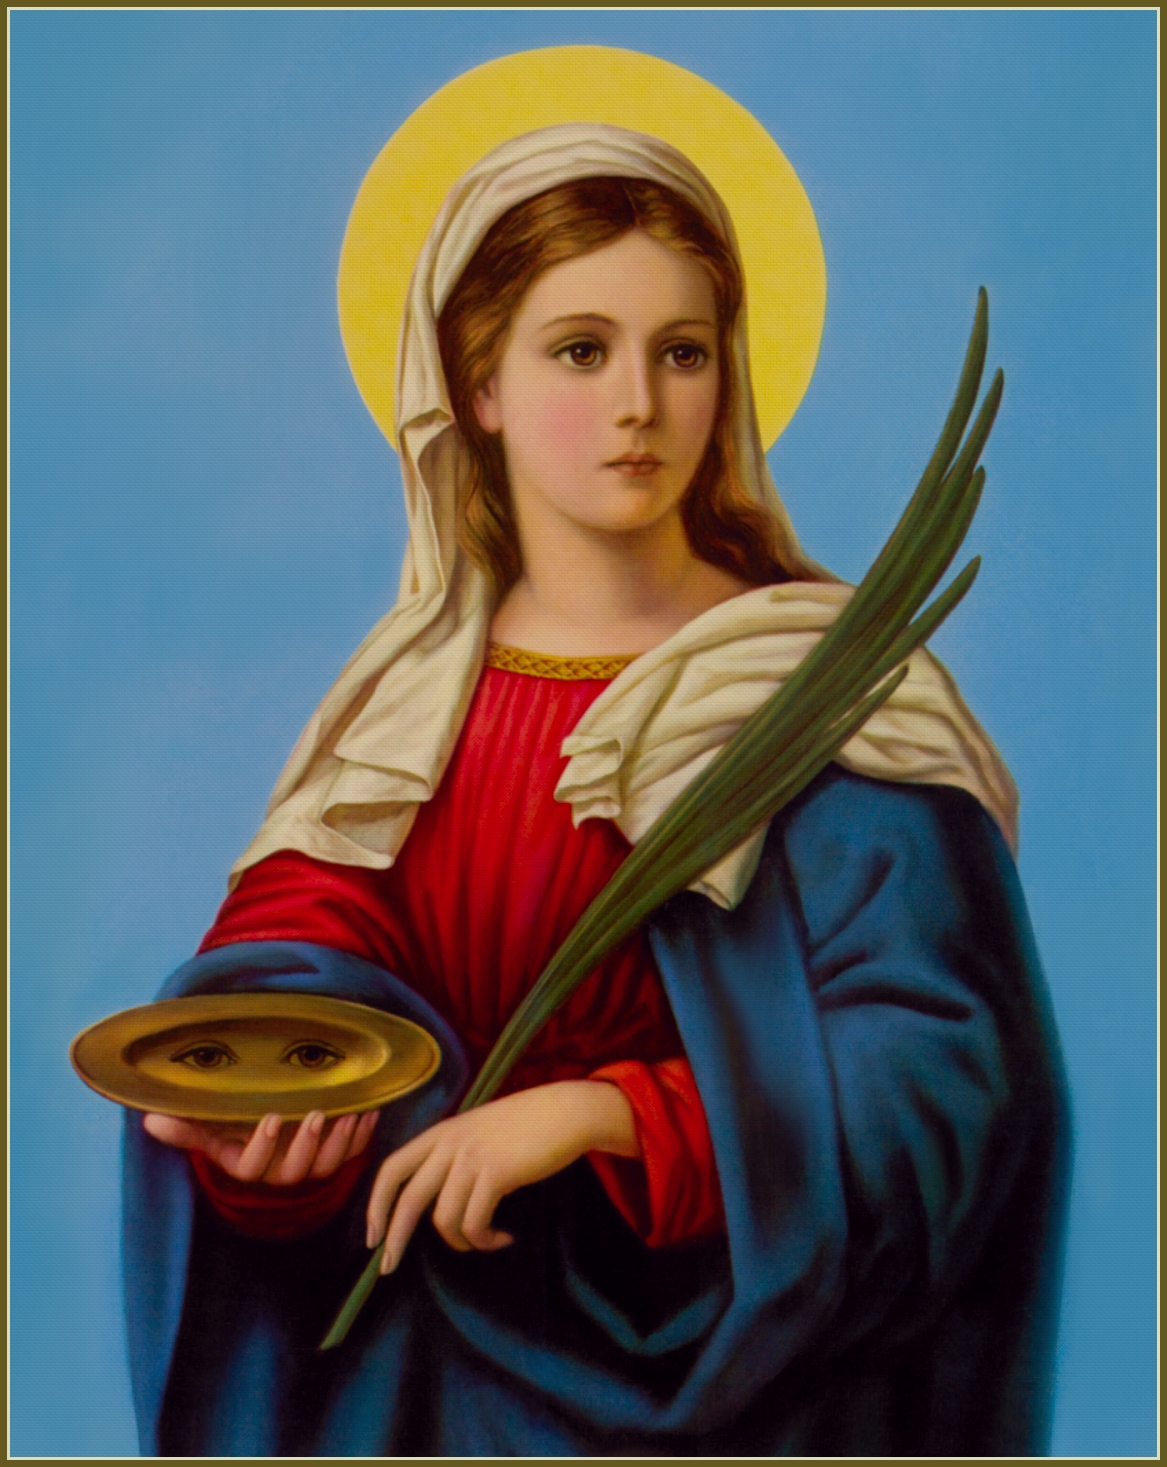 ST. LUCY